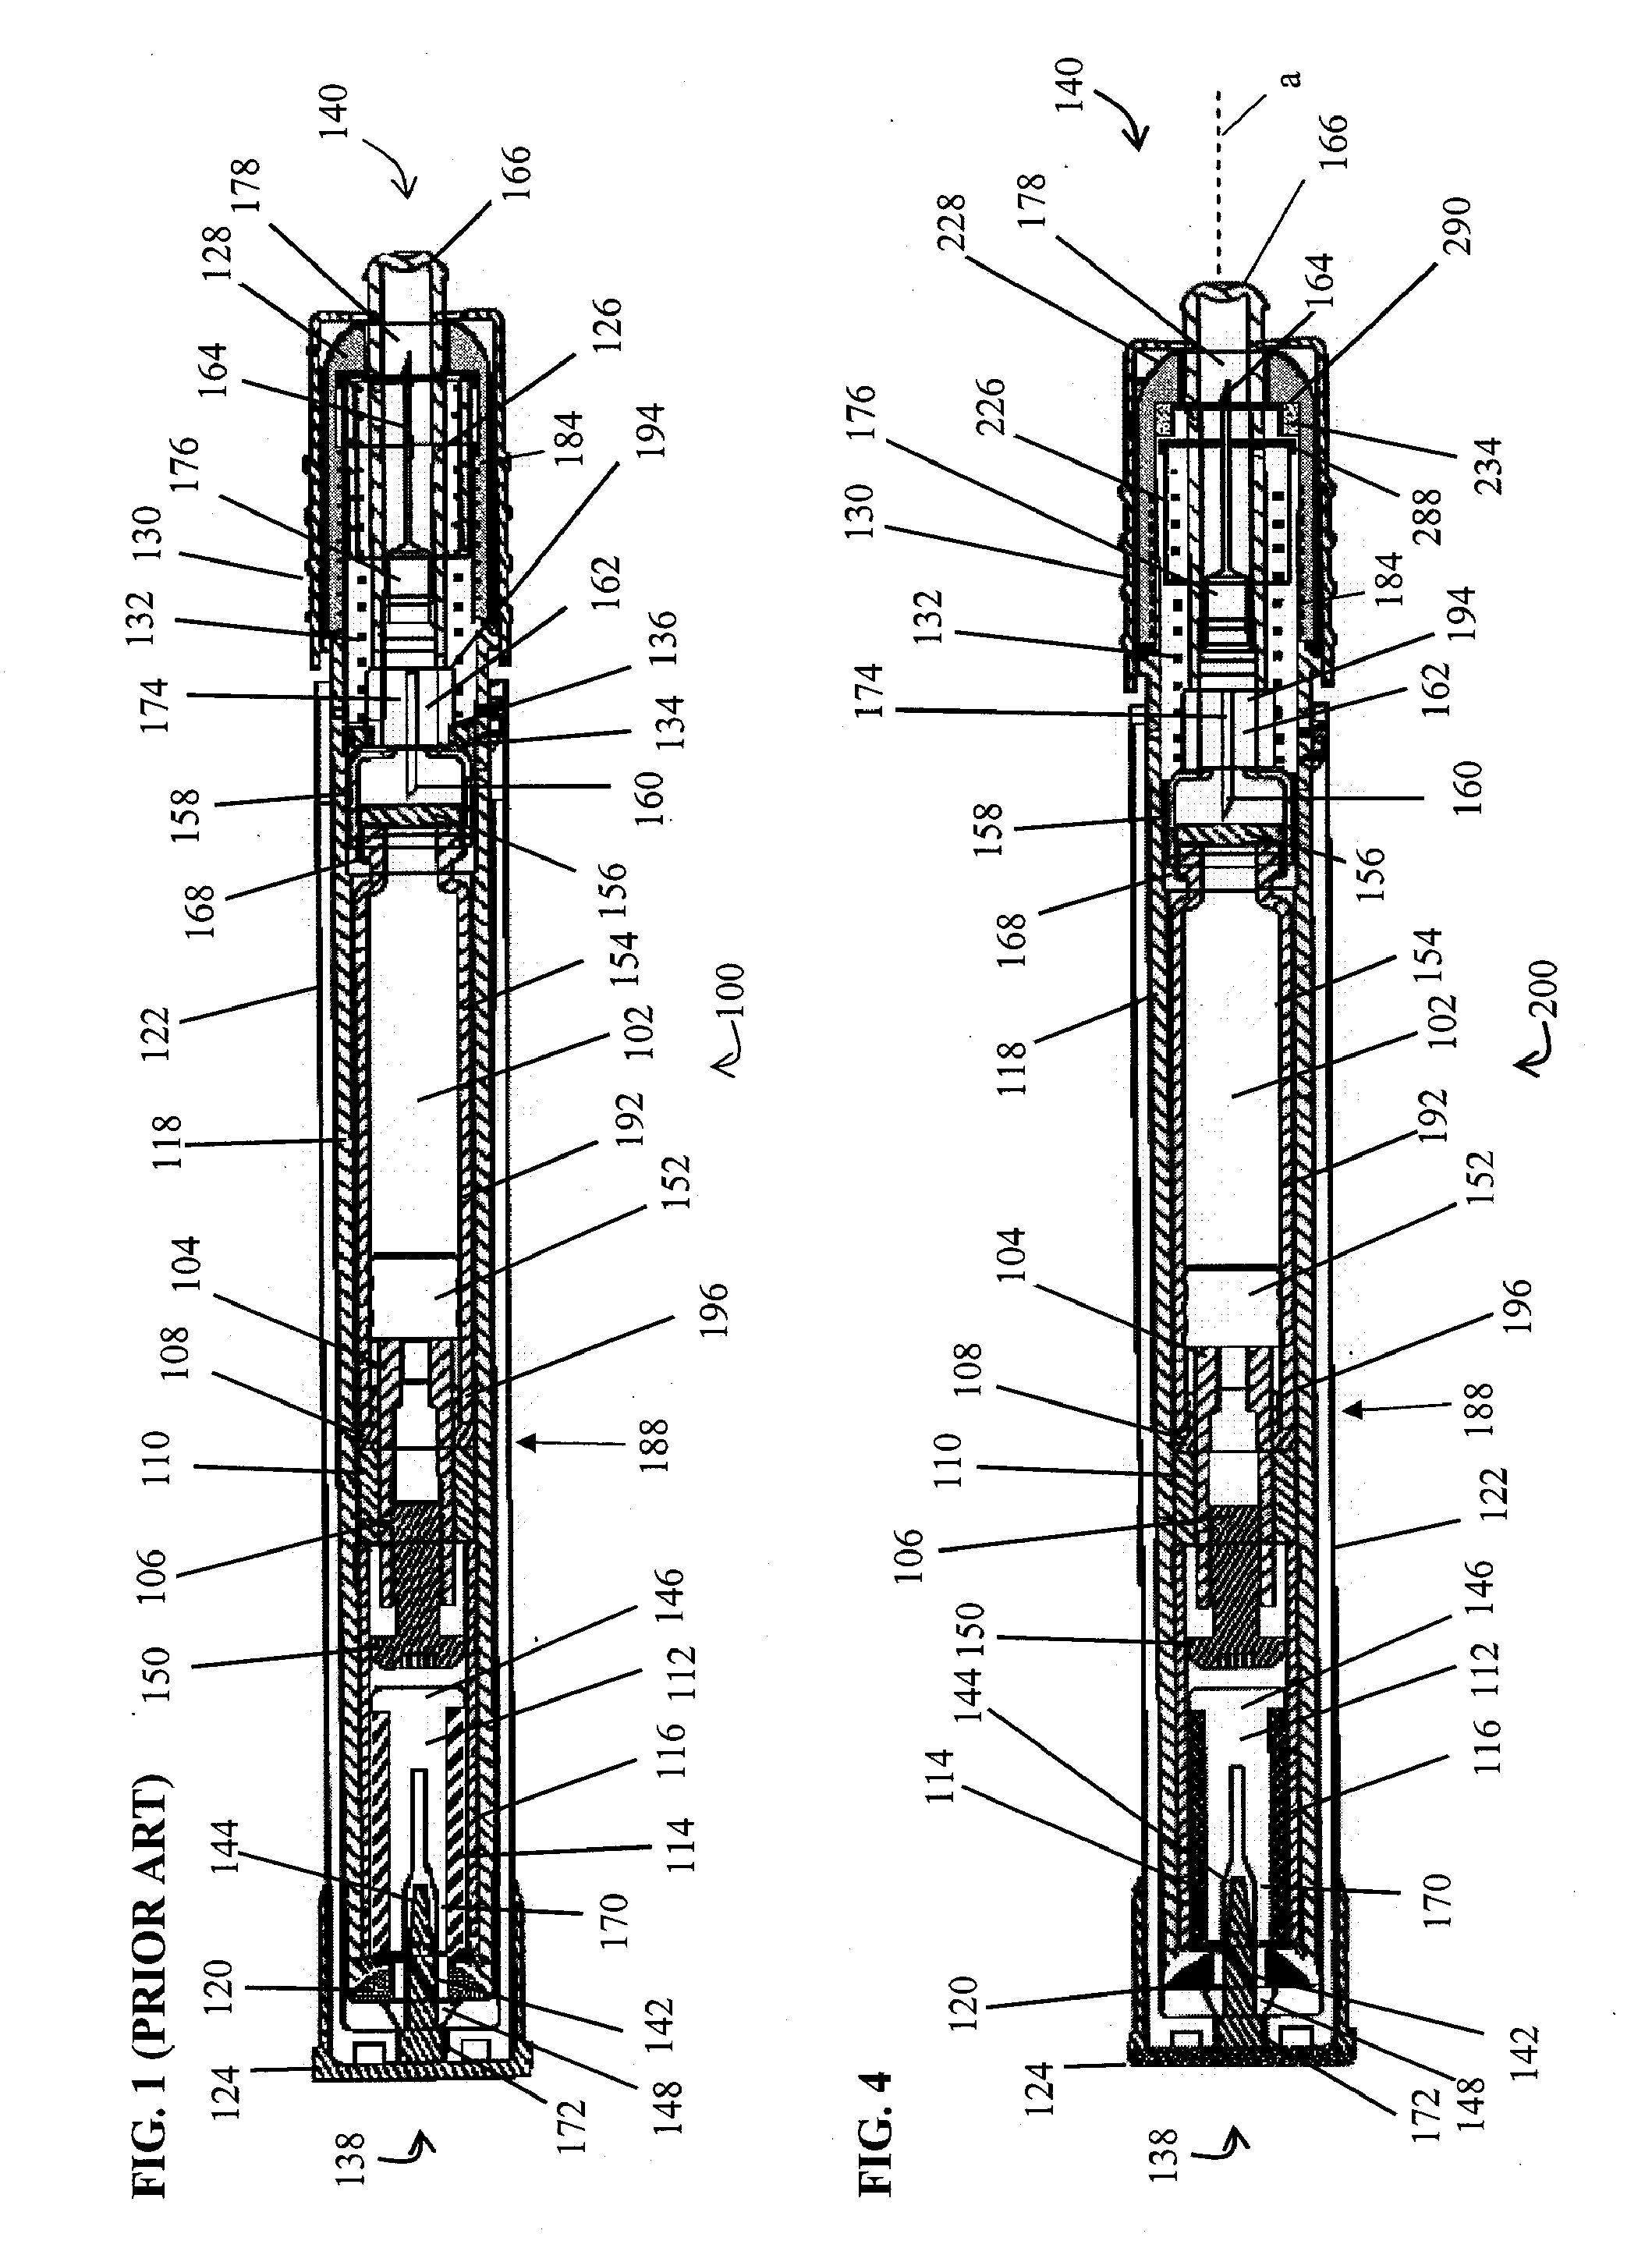 Shock absorber for automatic injector